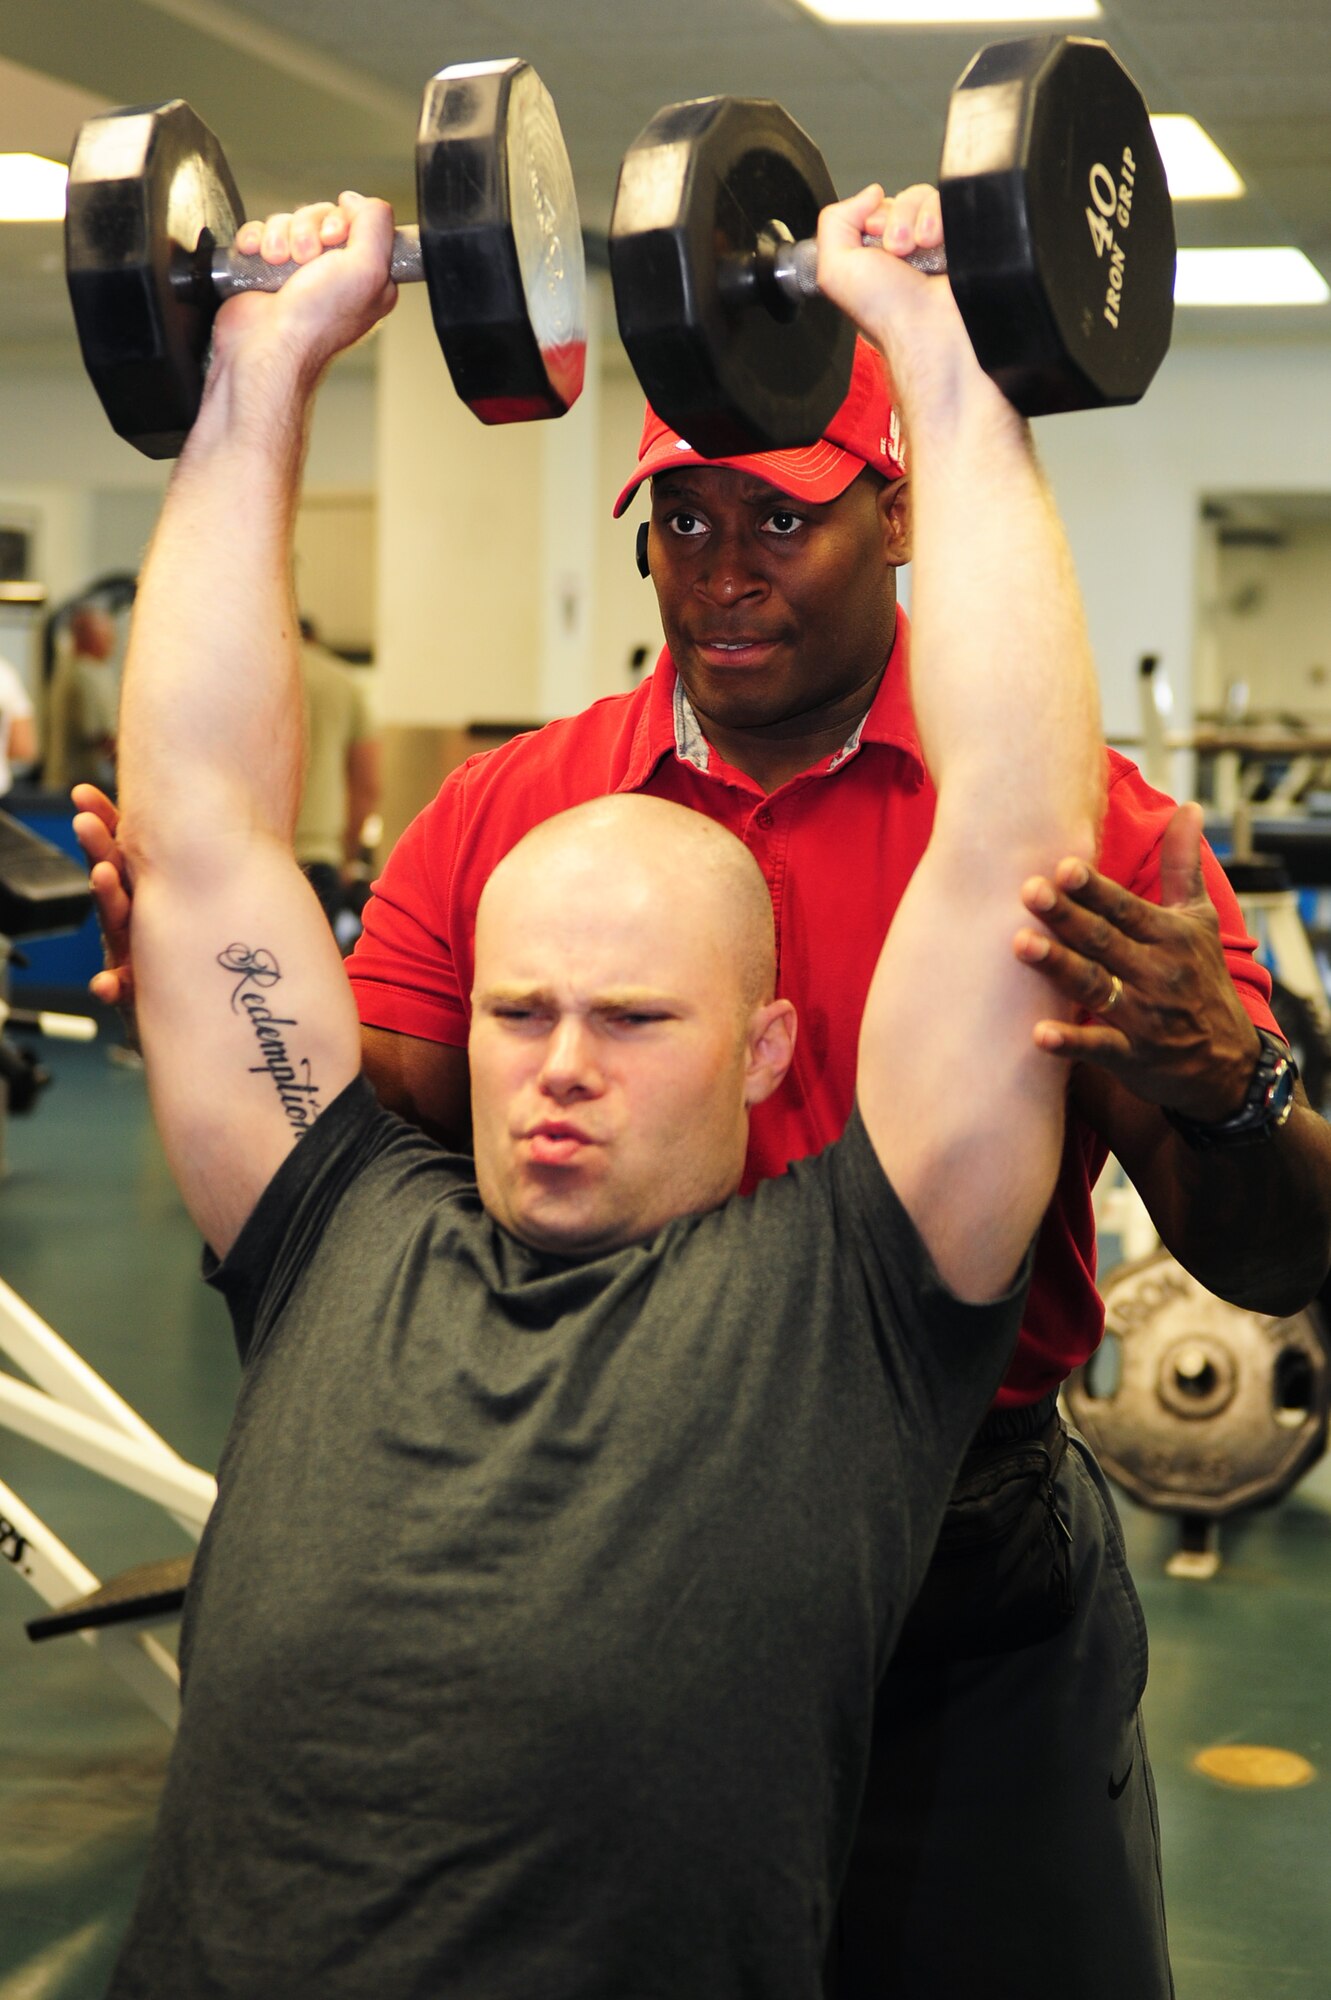 SCOTT AIR FORCE BASE, Ill. -- Staff Sgt. David Johnson, James Gym operations manager, finishes a lifting set while Omar Acosta, a personal trainer working at the James Gym, spots him. Mr. Acosta has been a personal trainer, power lifter and body builder for more than 30 years and is available to help military members improve their fitness. (U.S. Air Force photo/ Staff Sgt. Teresa M. Jennings)